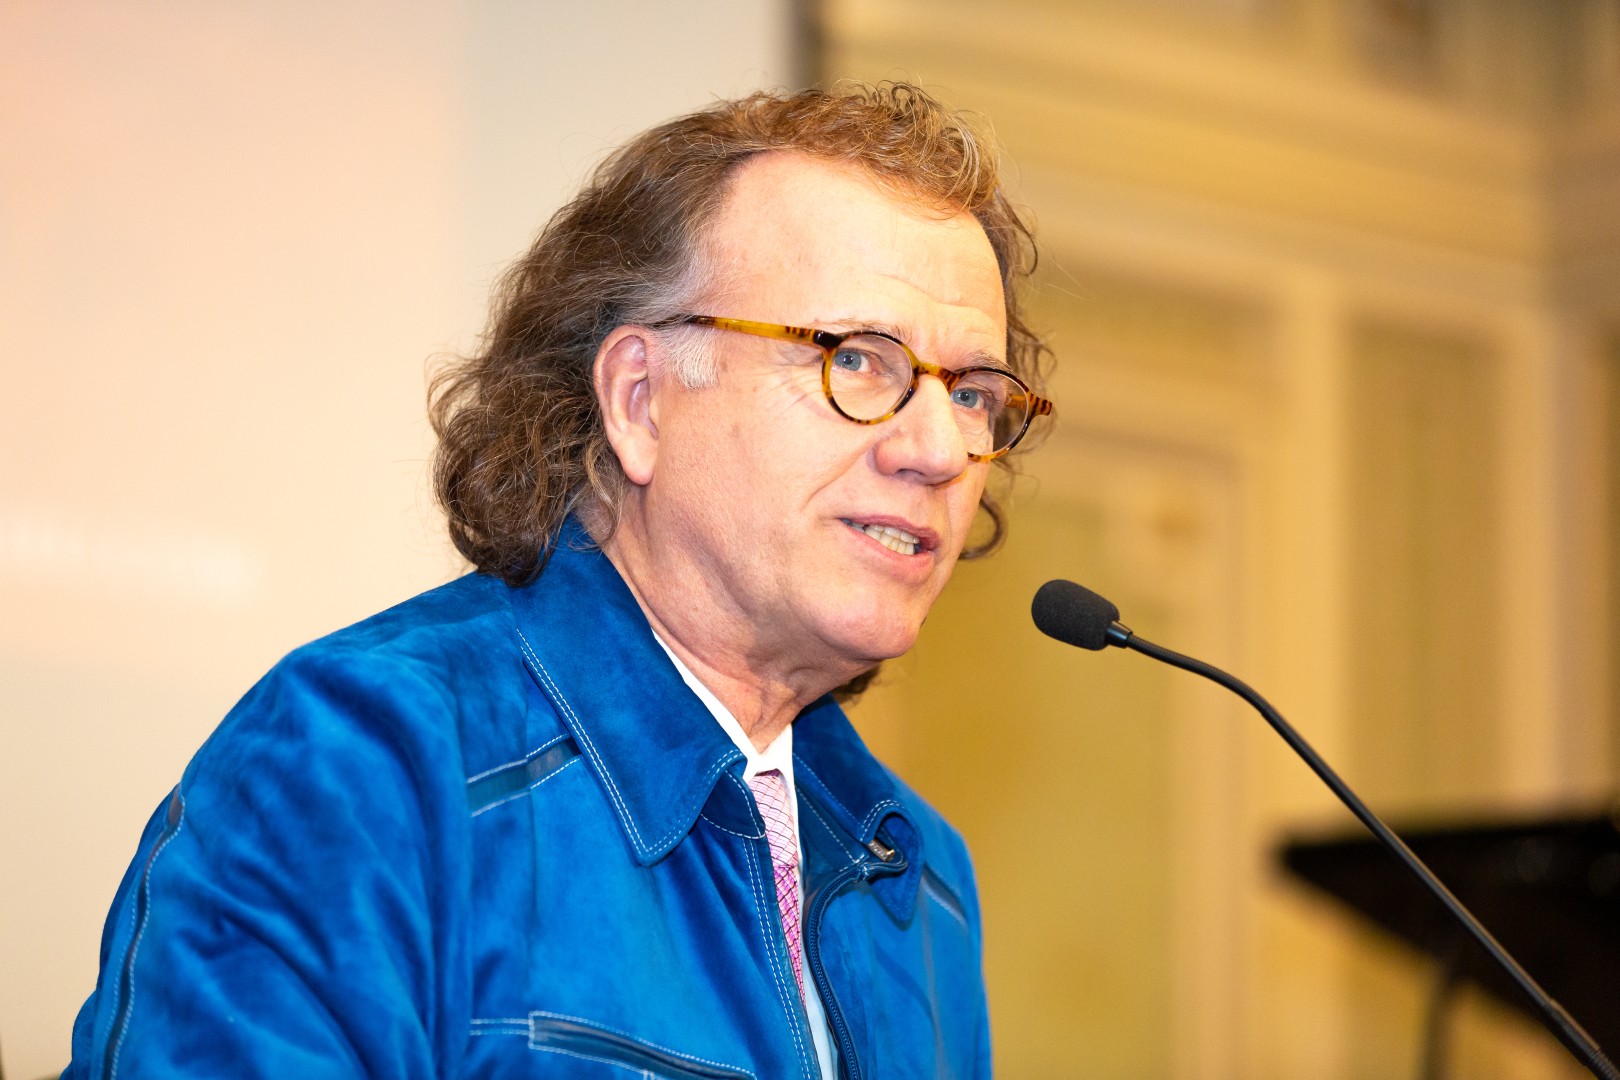 André Rieu at Ateneul Român in Bucharest on December 9, 2014 (f8be1ce8e1)